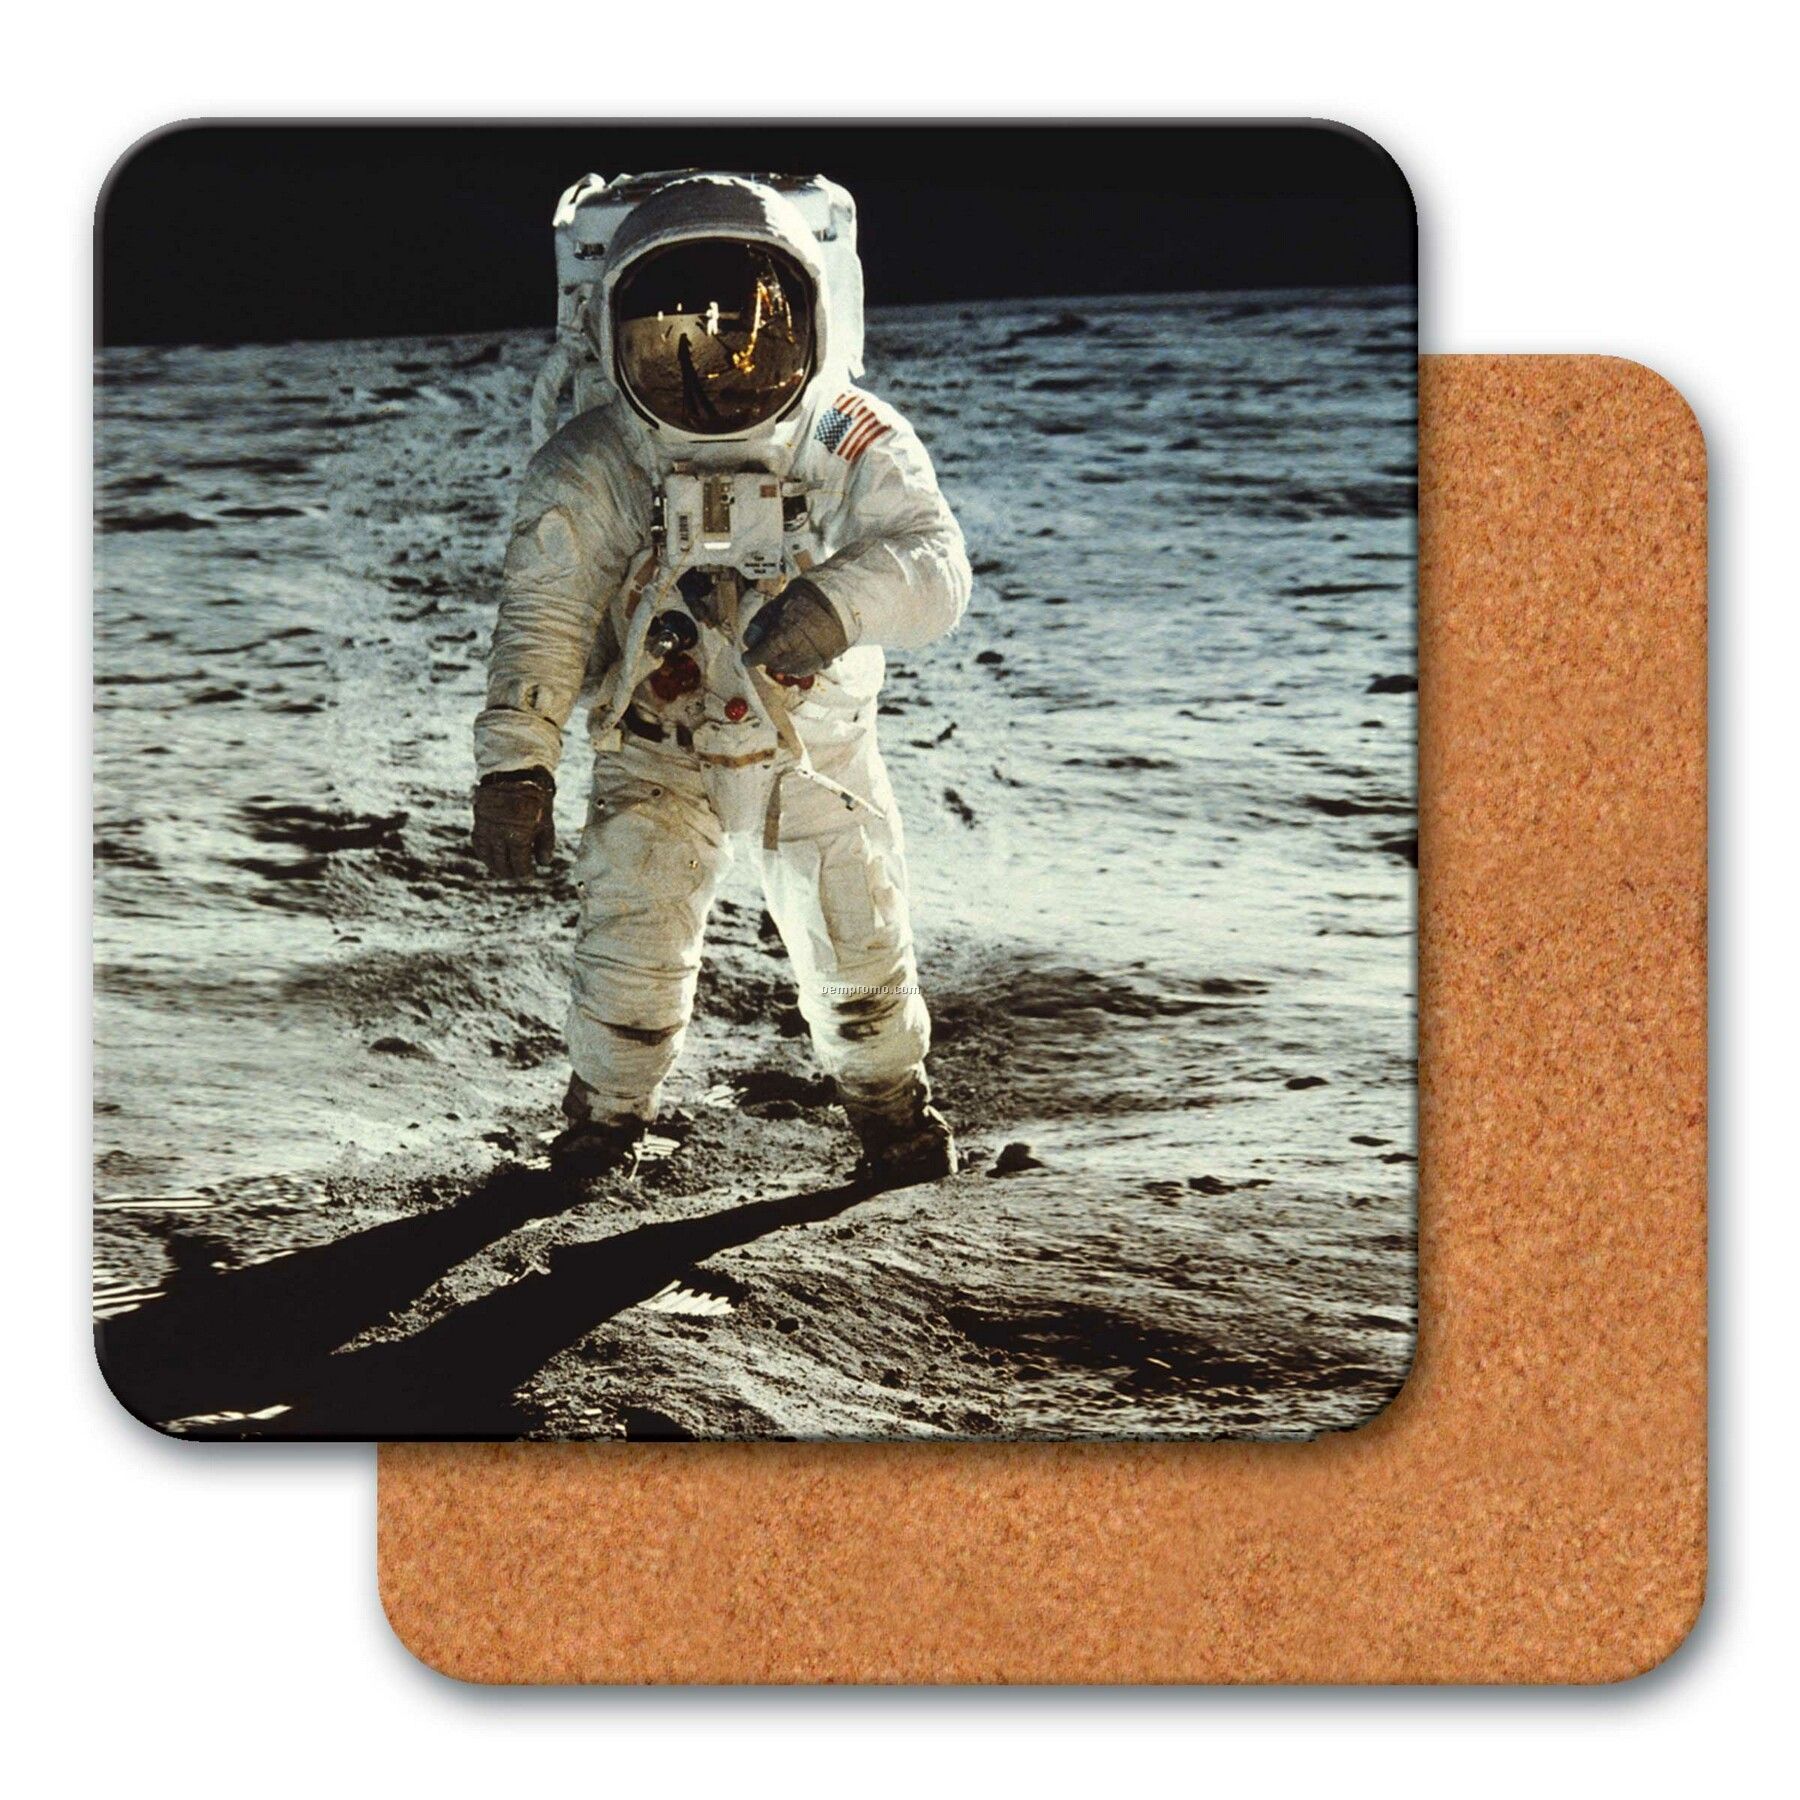 4" Square Coaster W/3d Lenticular Images Of An Astronaut (Blanks)